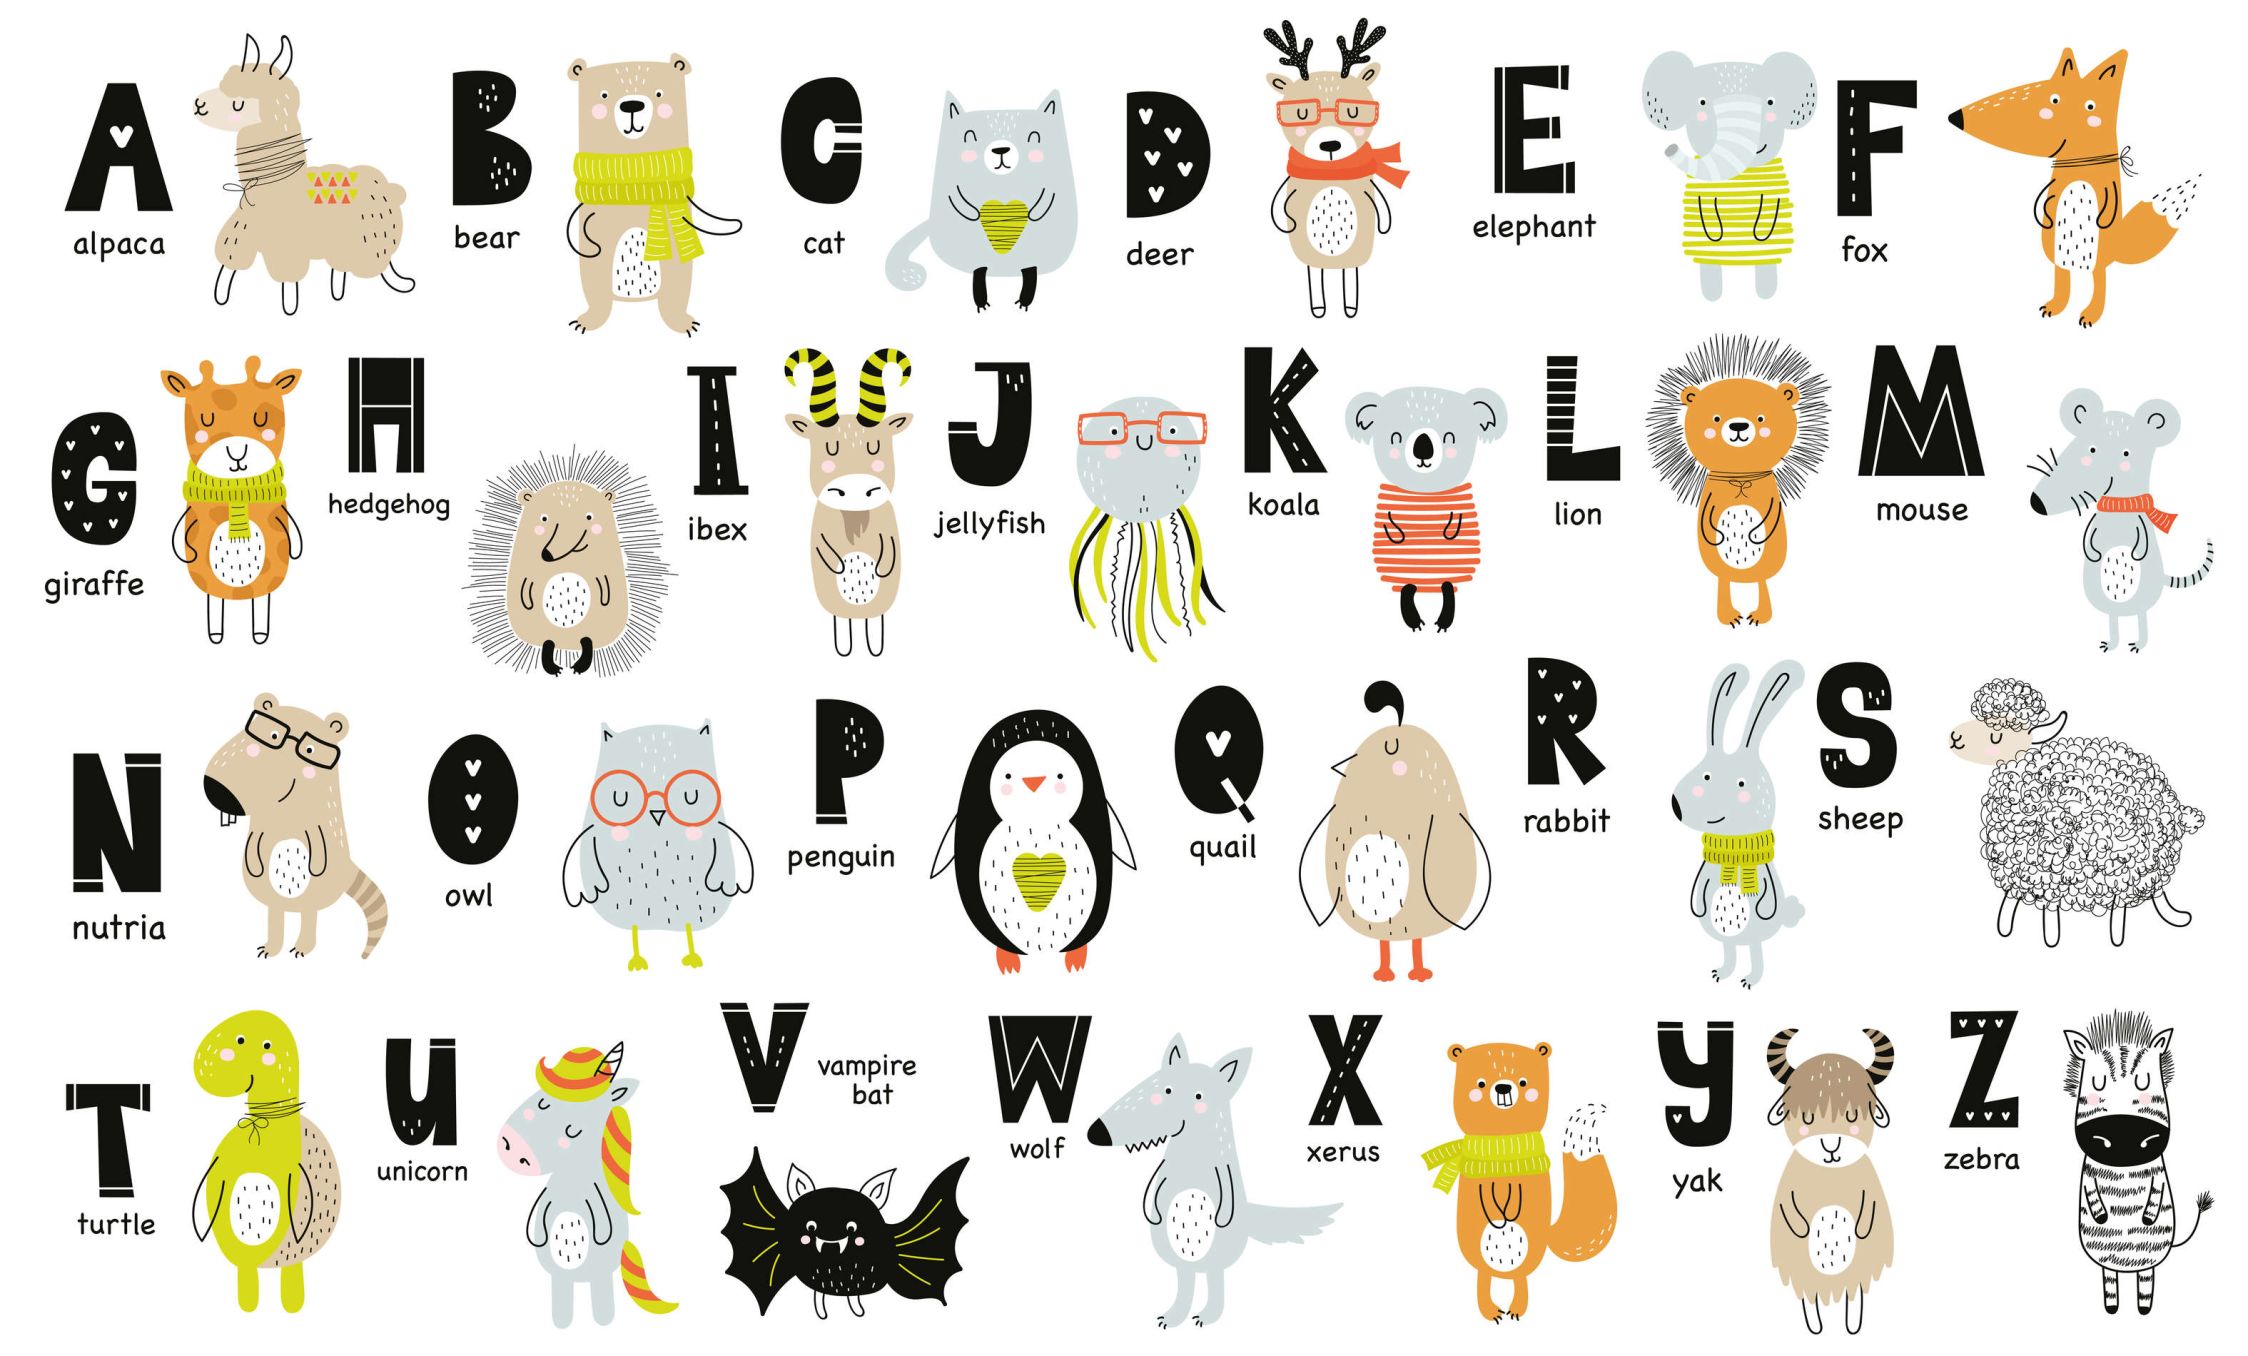             Photo wallpaper Alphabet with animals and animal names - textured non-woven
        